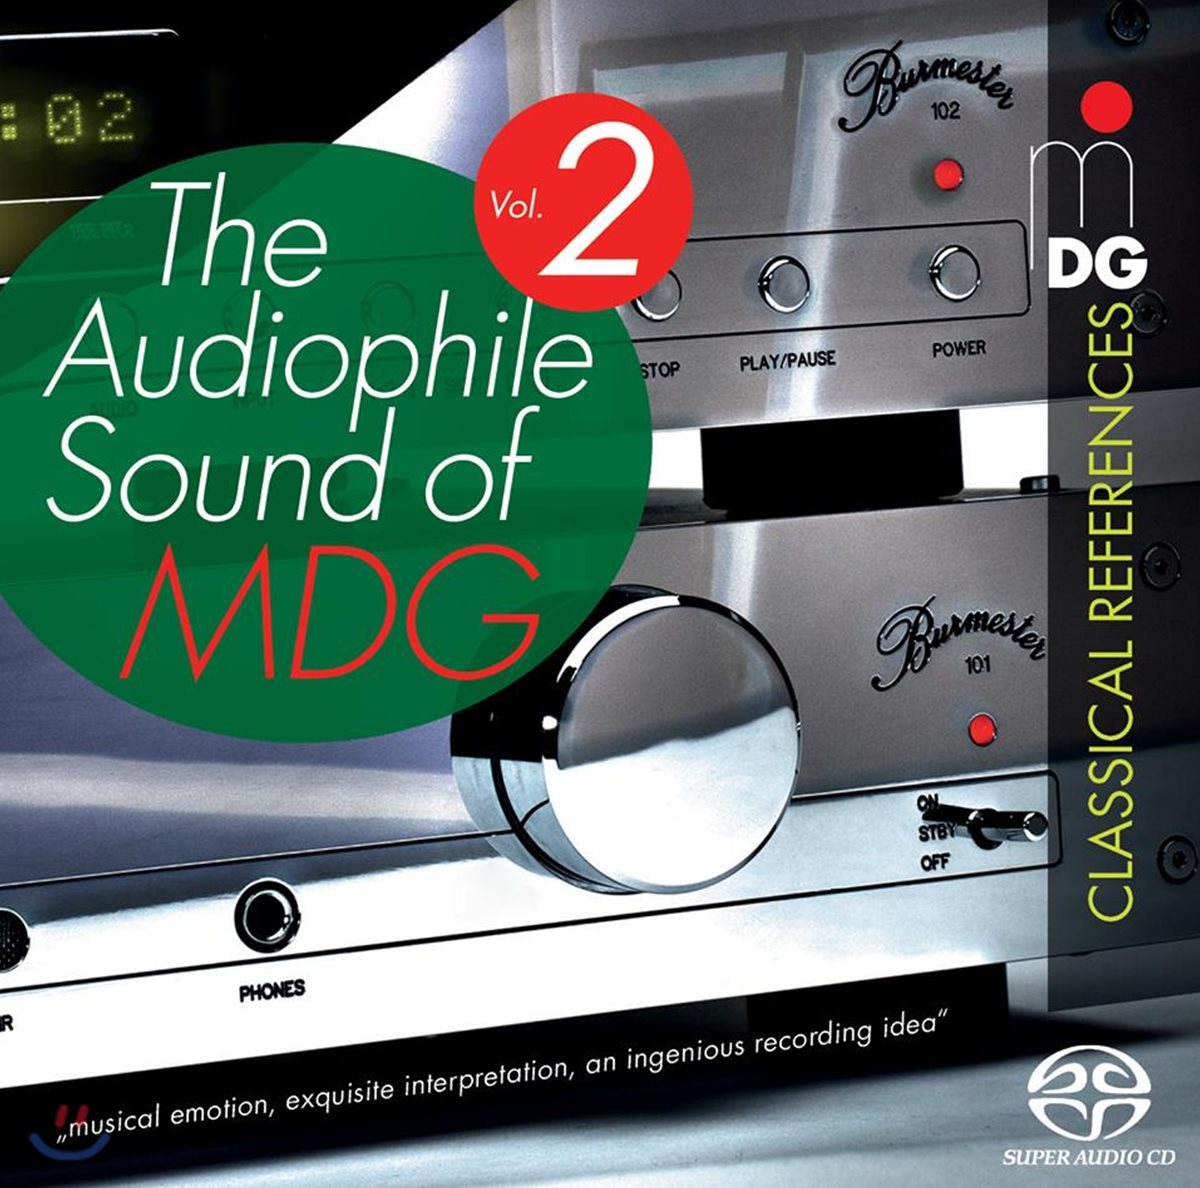 MDG 오디오파일 샘플러 2집 (The Audiophile Sound of MDG Vol. 2 - Classical References) 